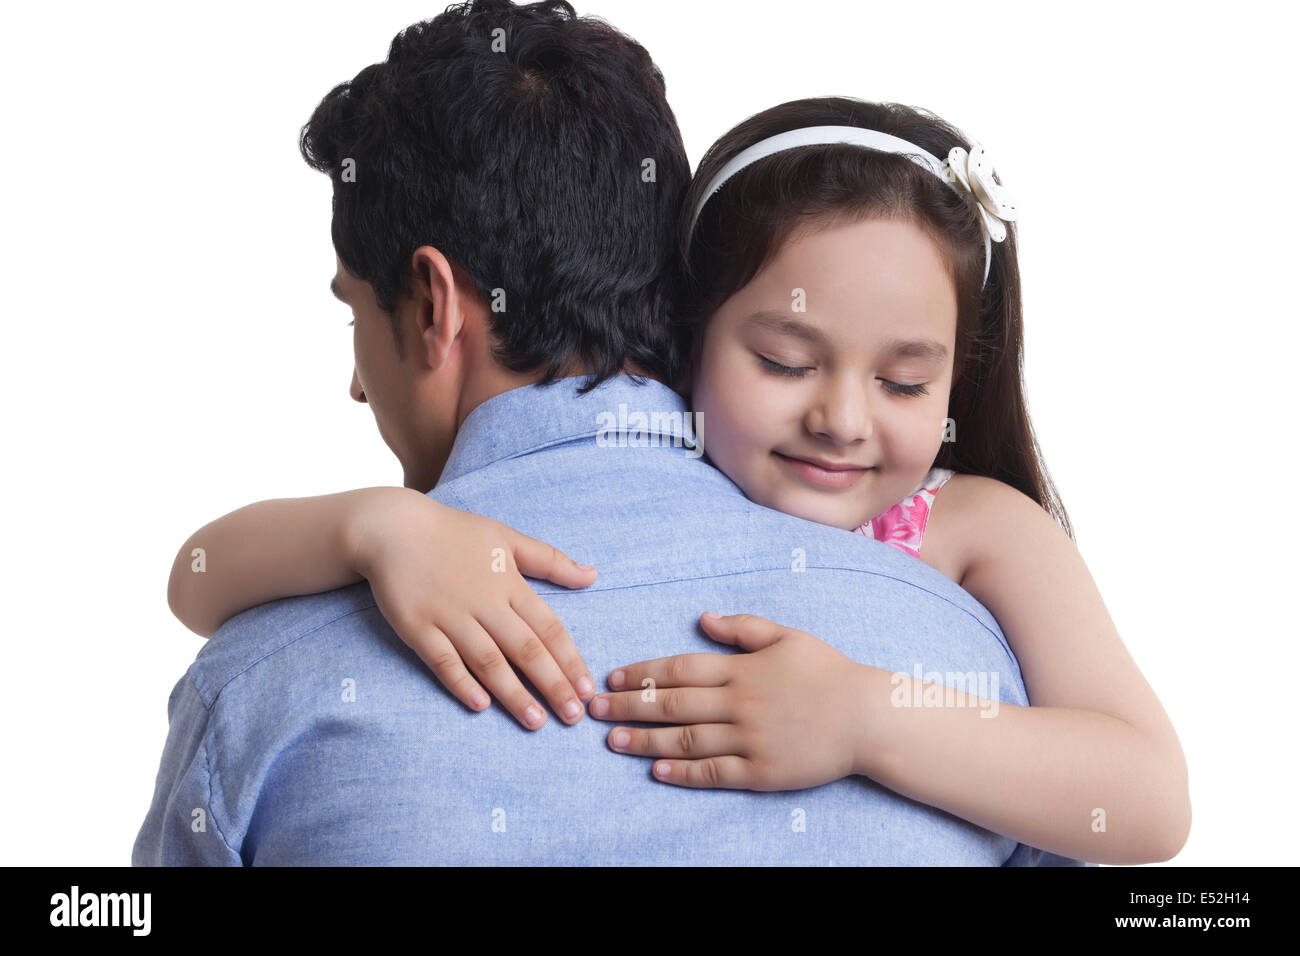 Girl embracing father over white background Stock Photo